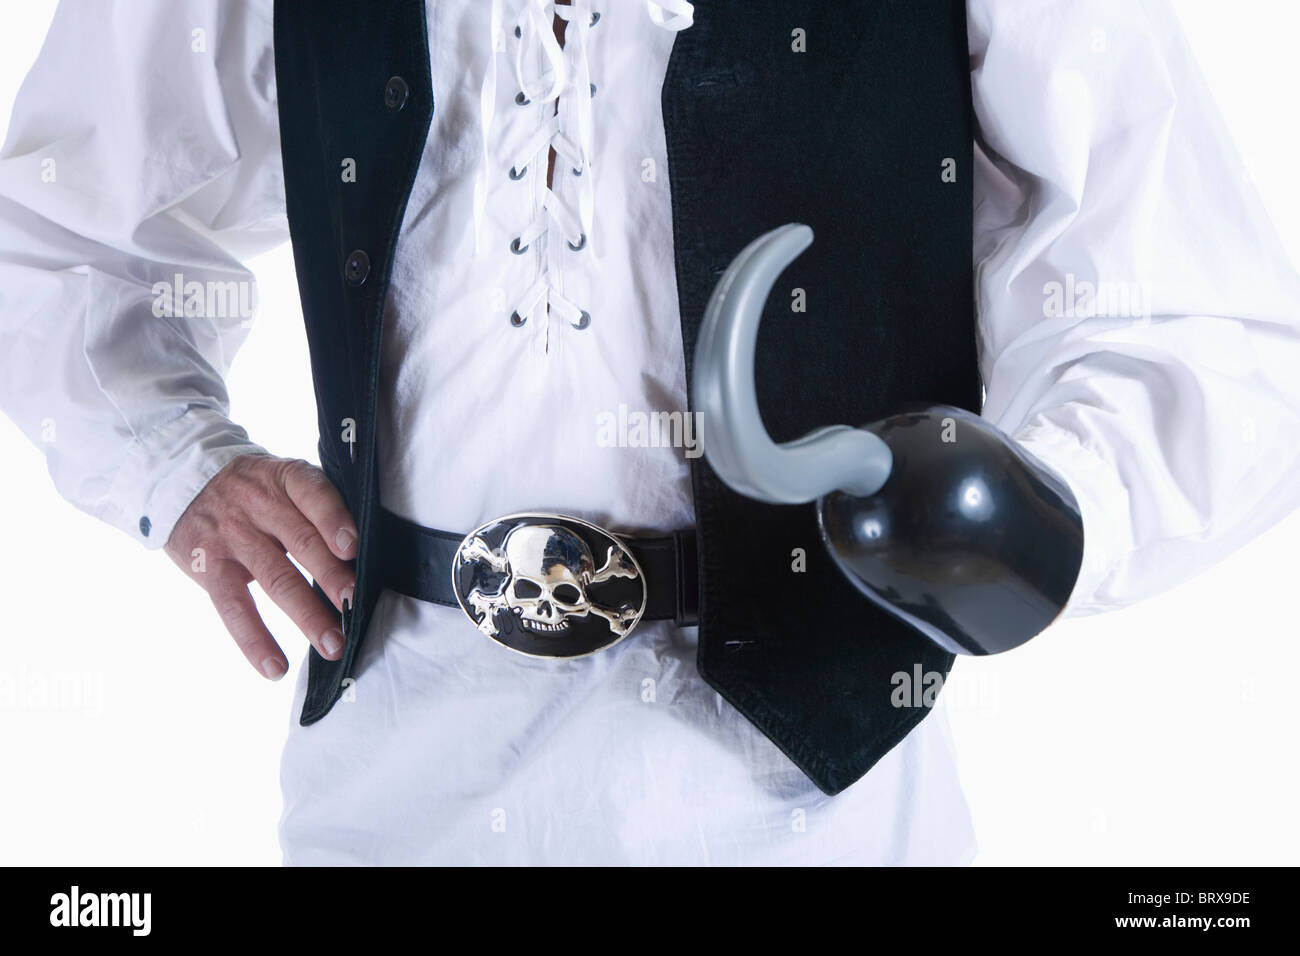 Man wearing pirate costume, mid section Stock Photo